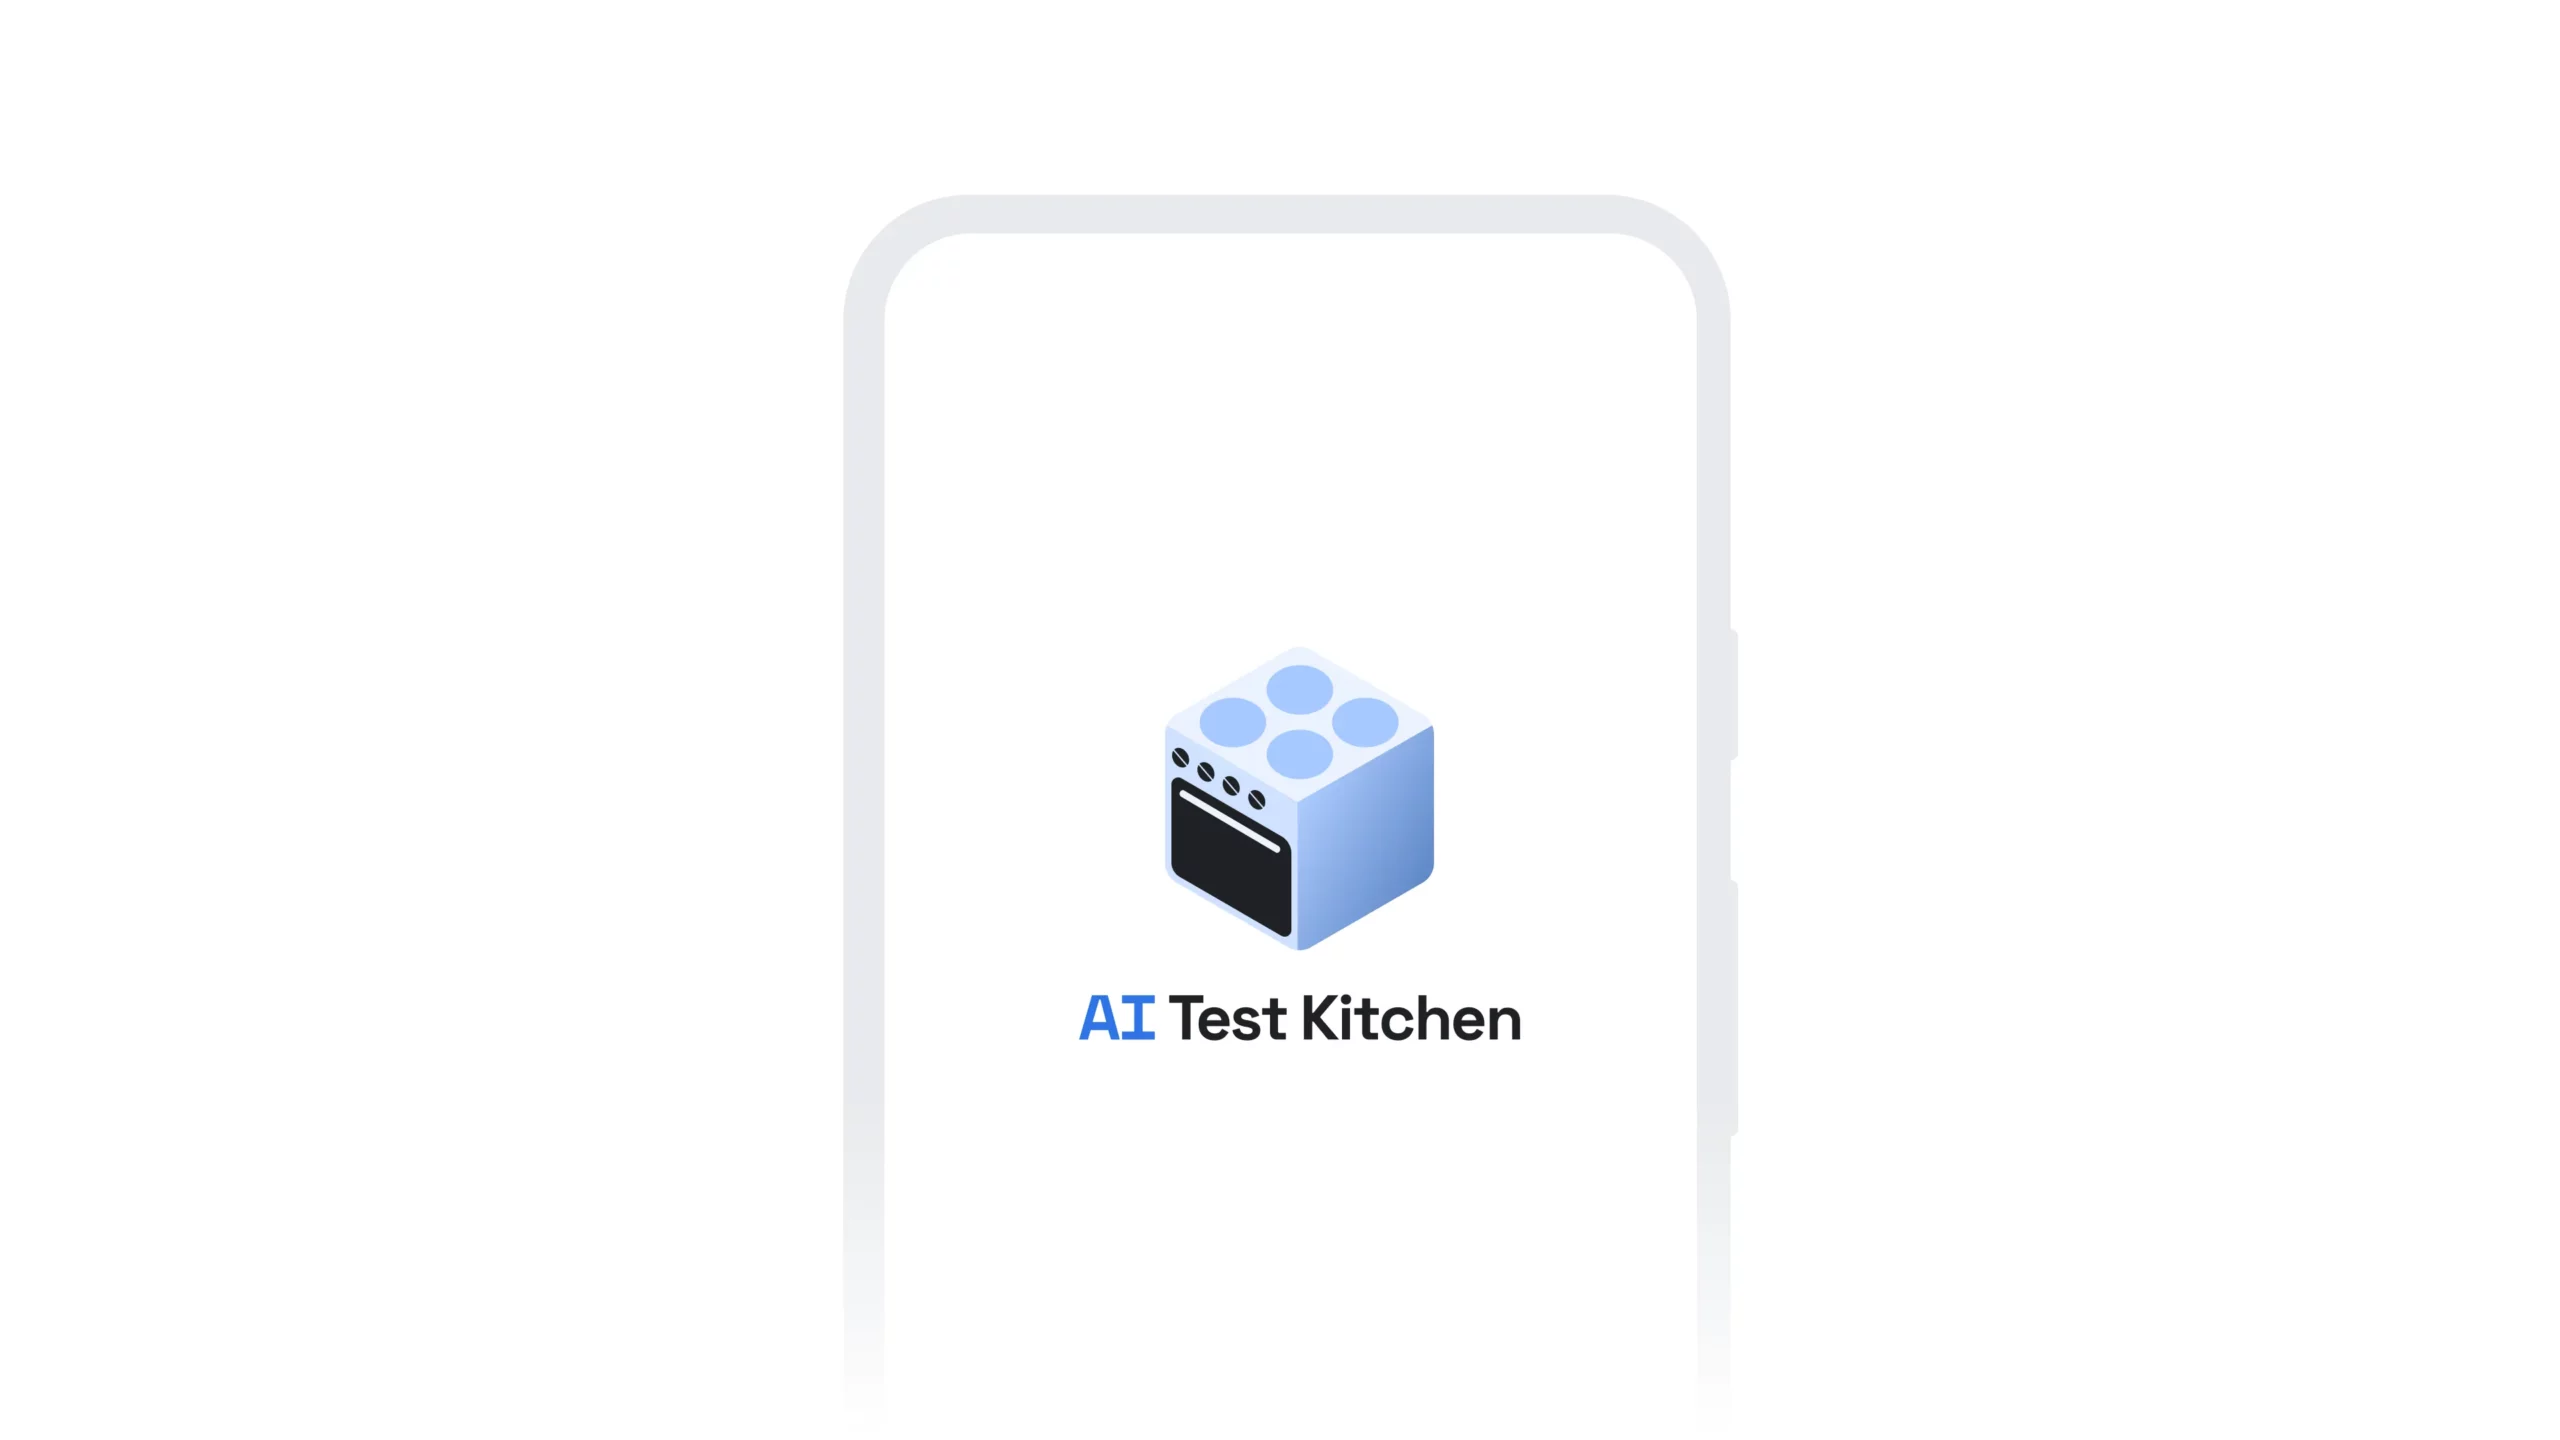 How To Signup For AI Test Kitchen